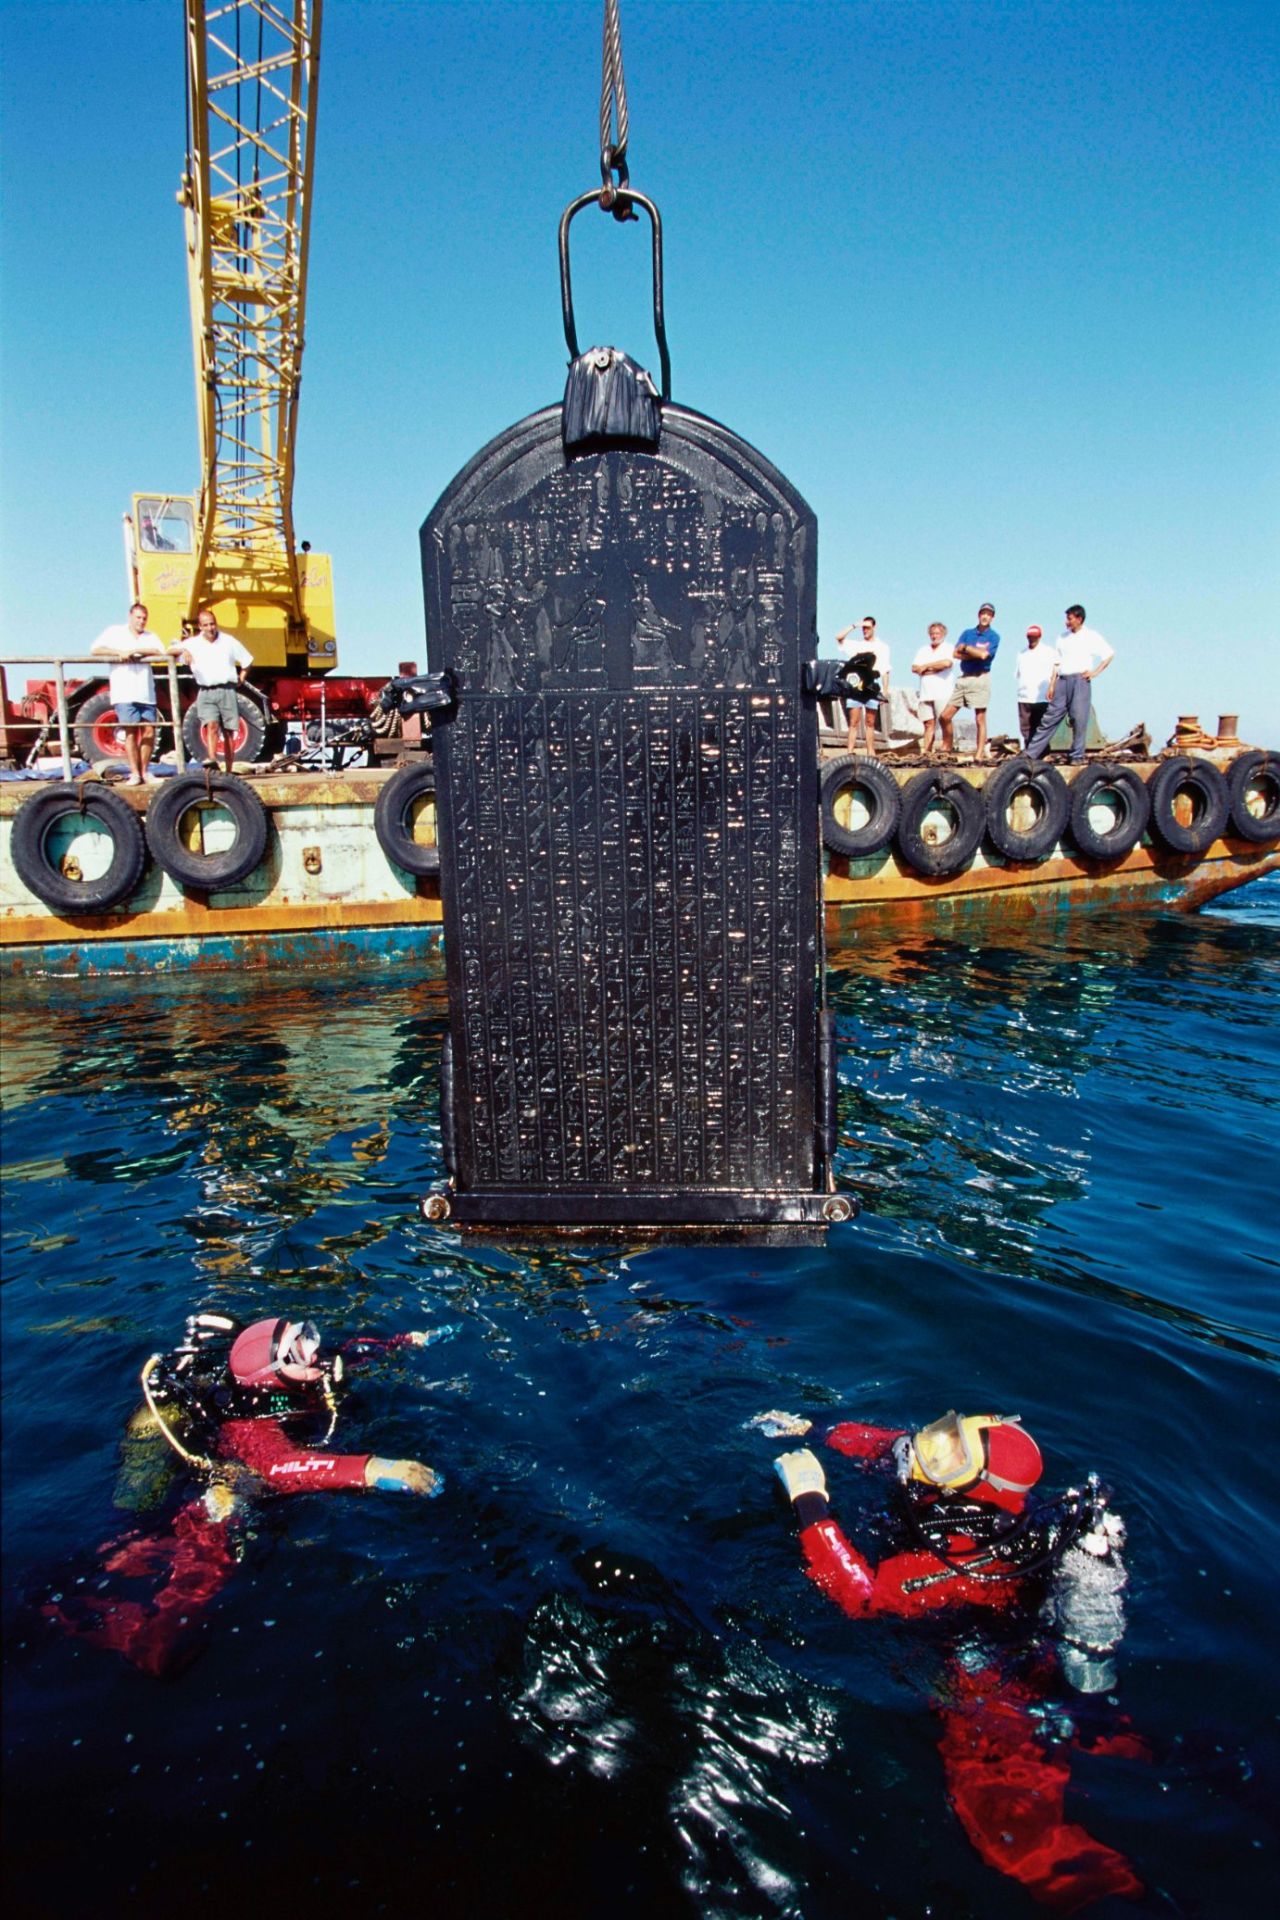 The intact stele is over six feet tall and was carefully removed by Goddio's team for preservation.